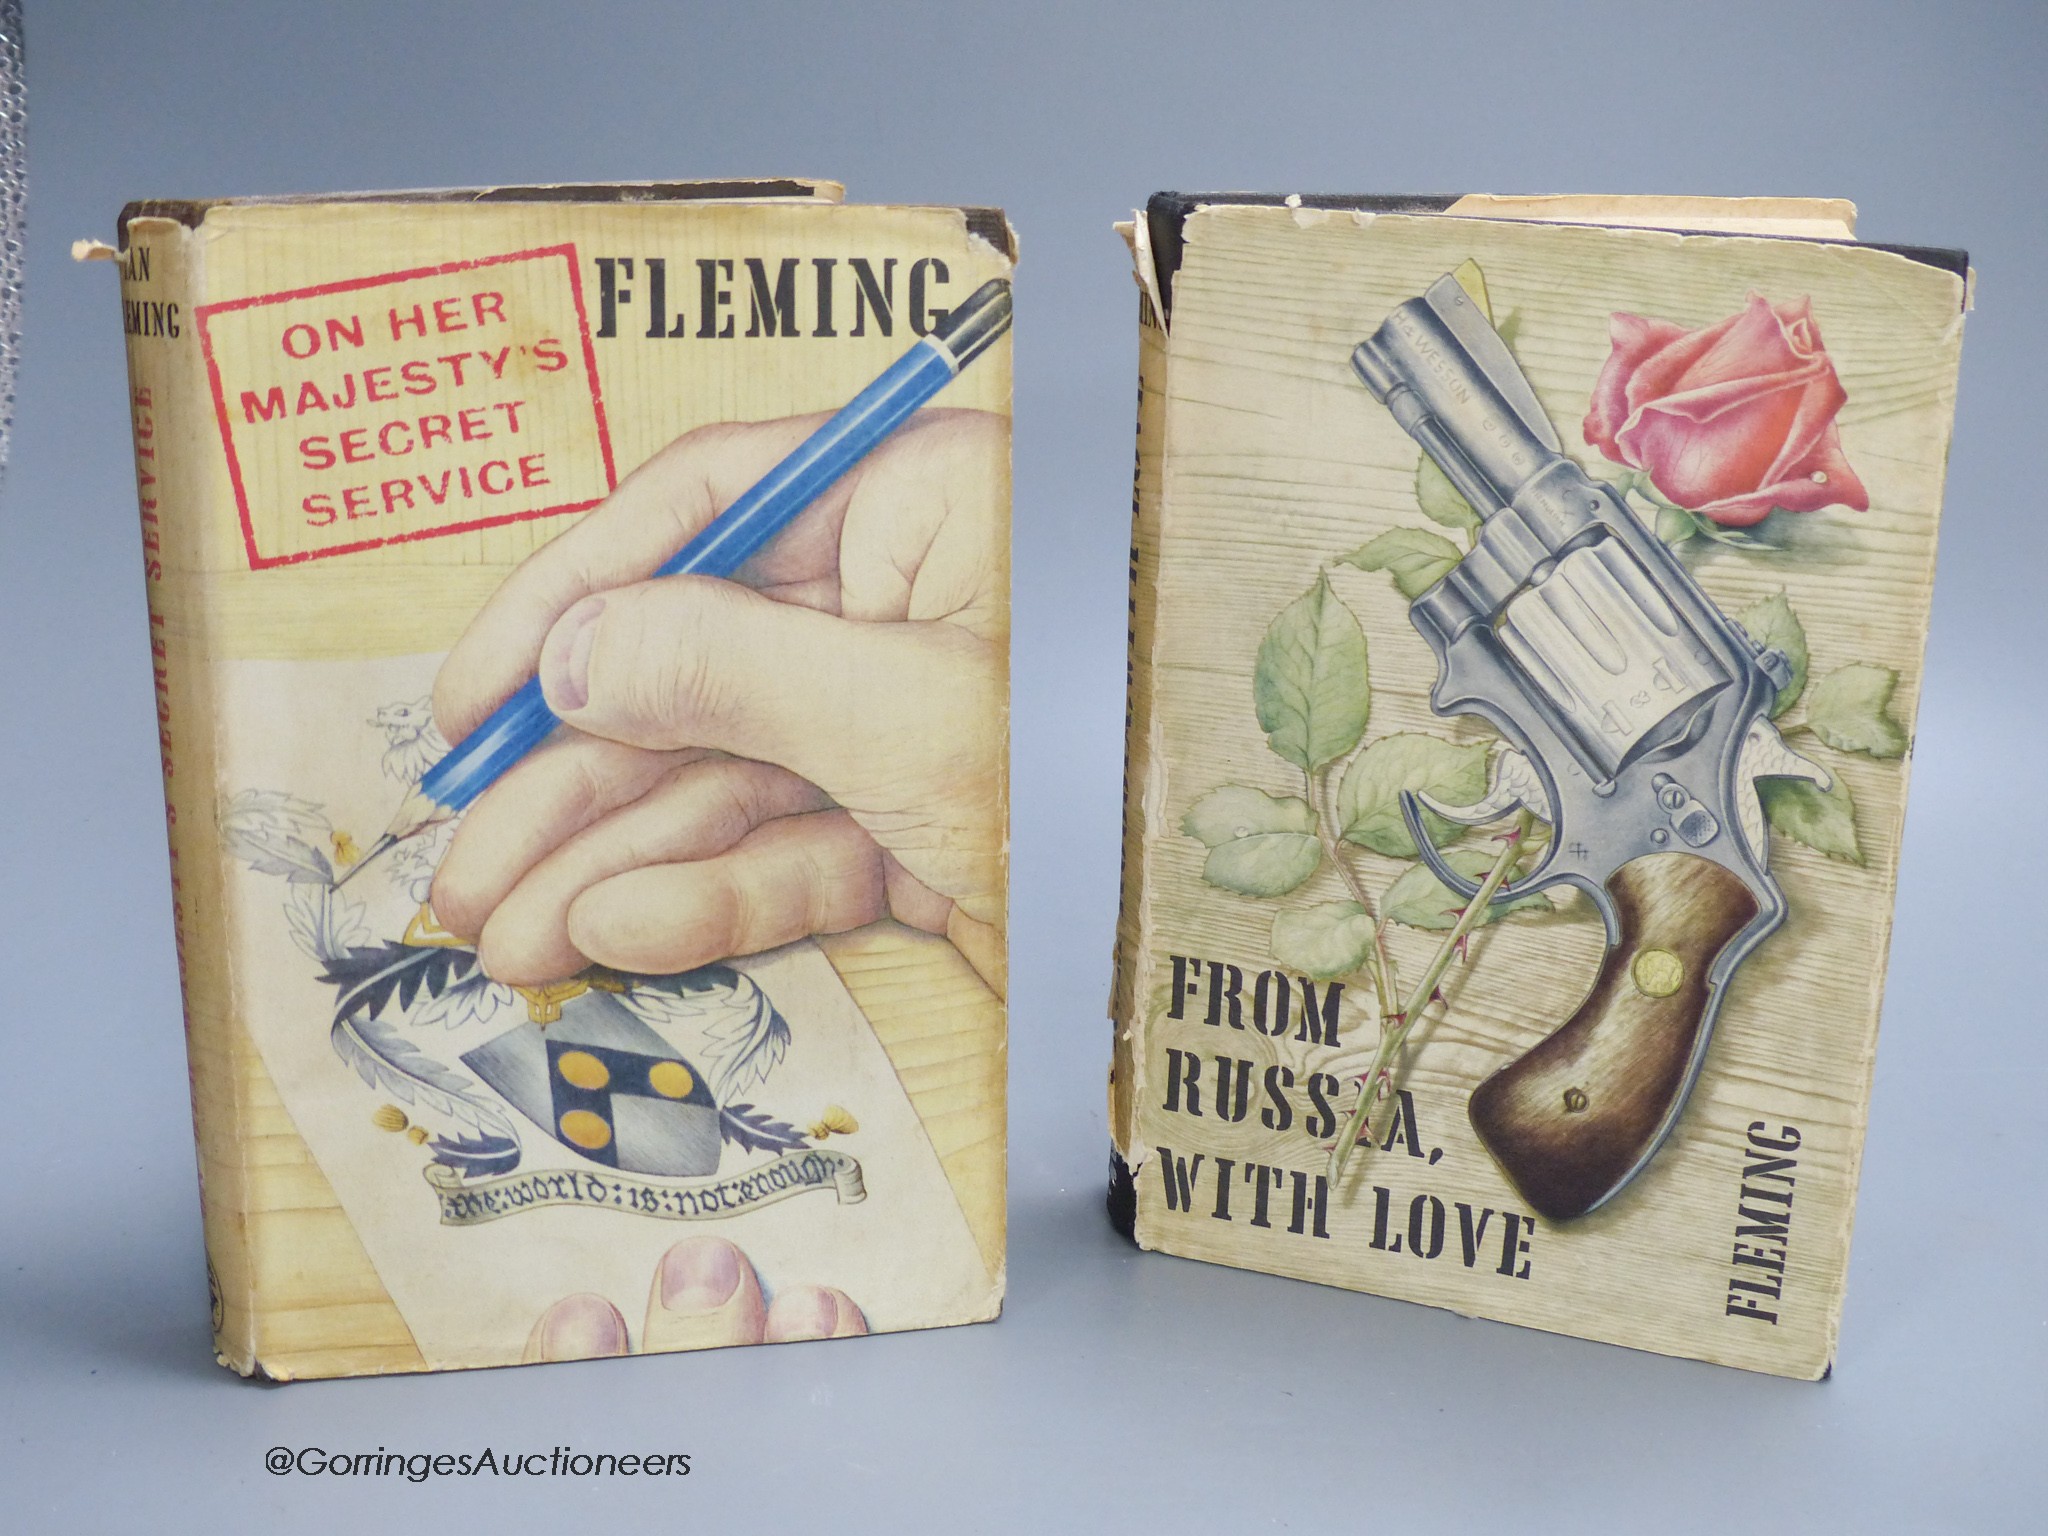 Fleming, Ian - On Her Majesty’s Secret Service, 1st edition, with unclipped d/j designed by Richard Chopping, original dark brown cloth with ski motif to front board, London, 1963; and From Russia With Love, 4th impressi